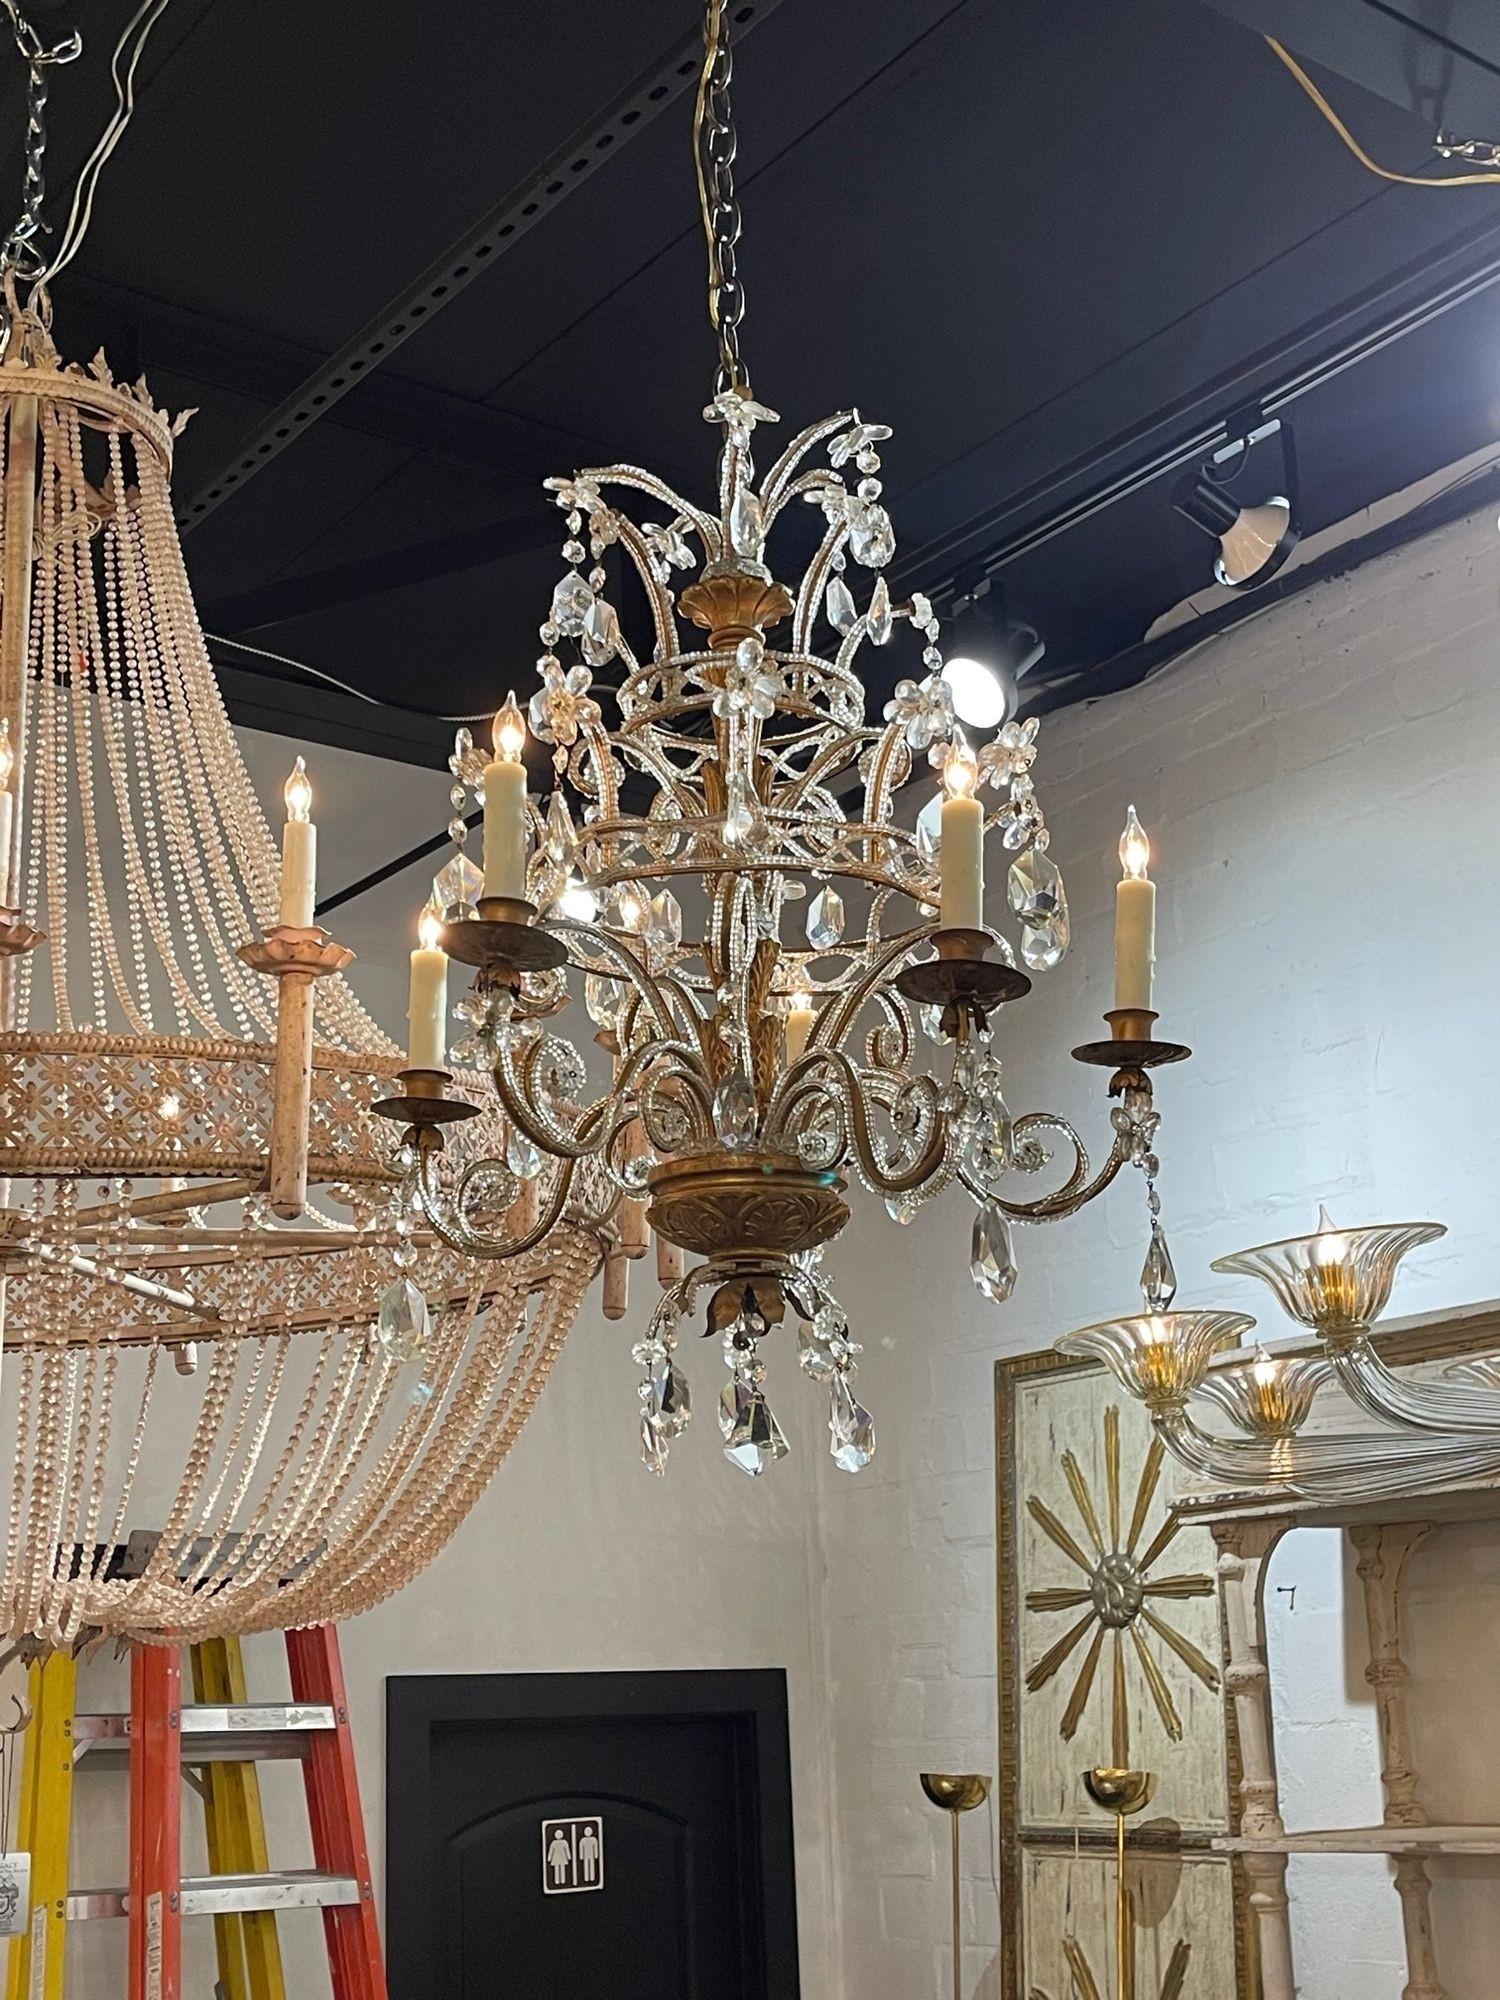 Very fine vintage Italian carved and giltwood beaded crystal chandelier with 6 lights. Beautiful scale and shaped on this fixture and it is covered in beads and crystals. Adds a reach touch of elegance!!